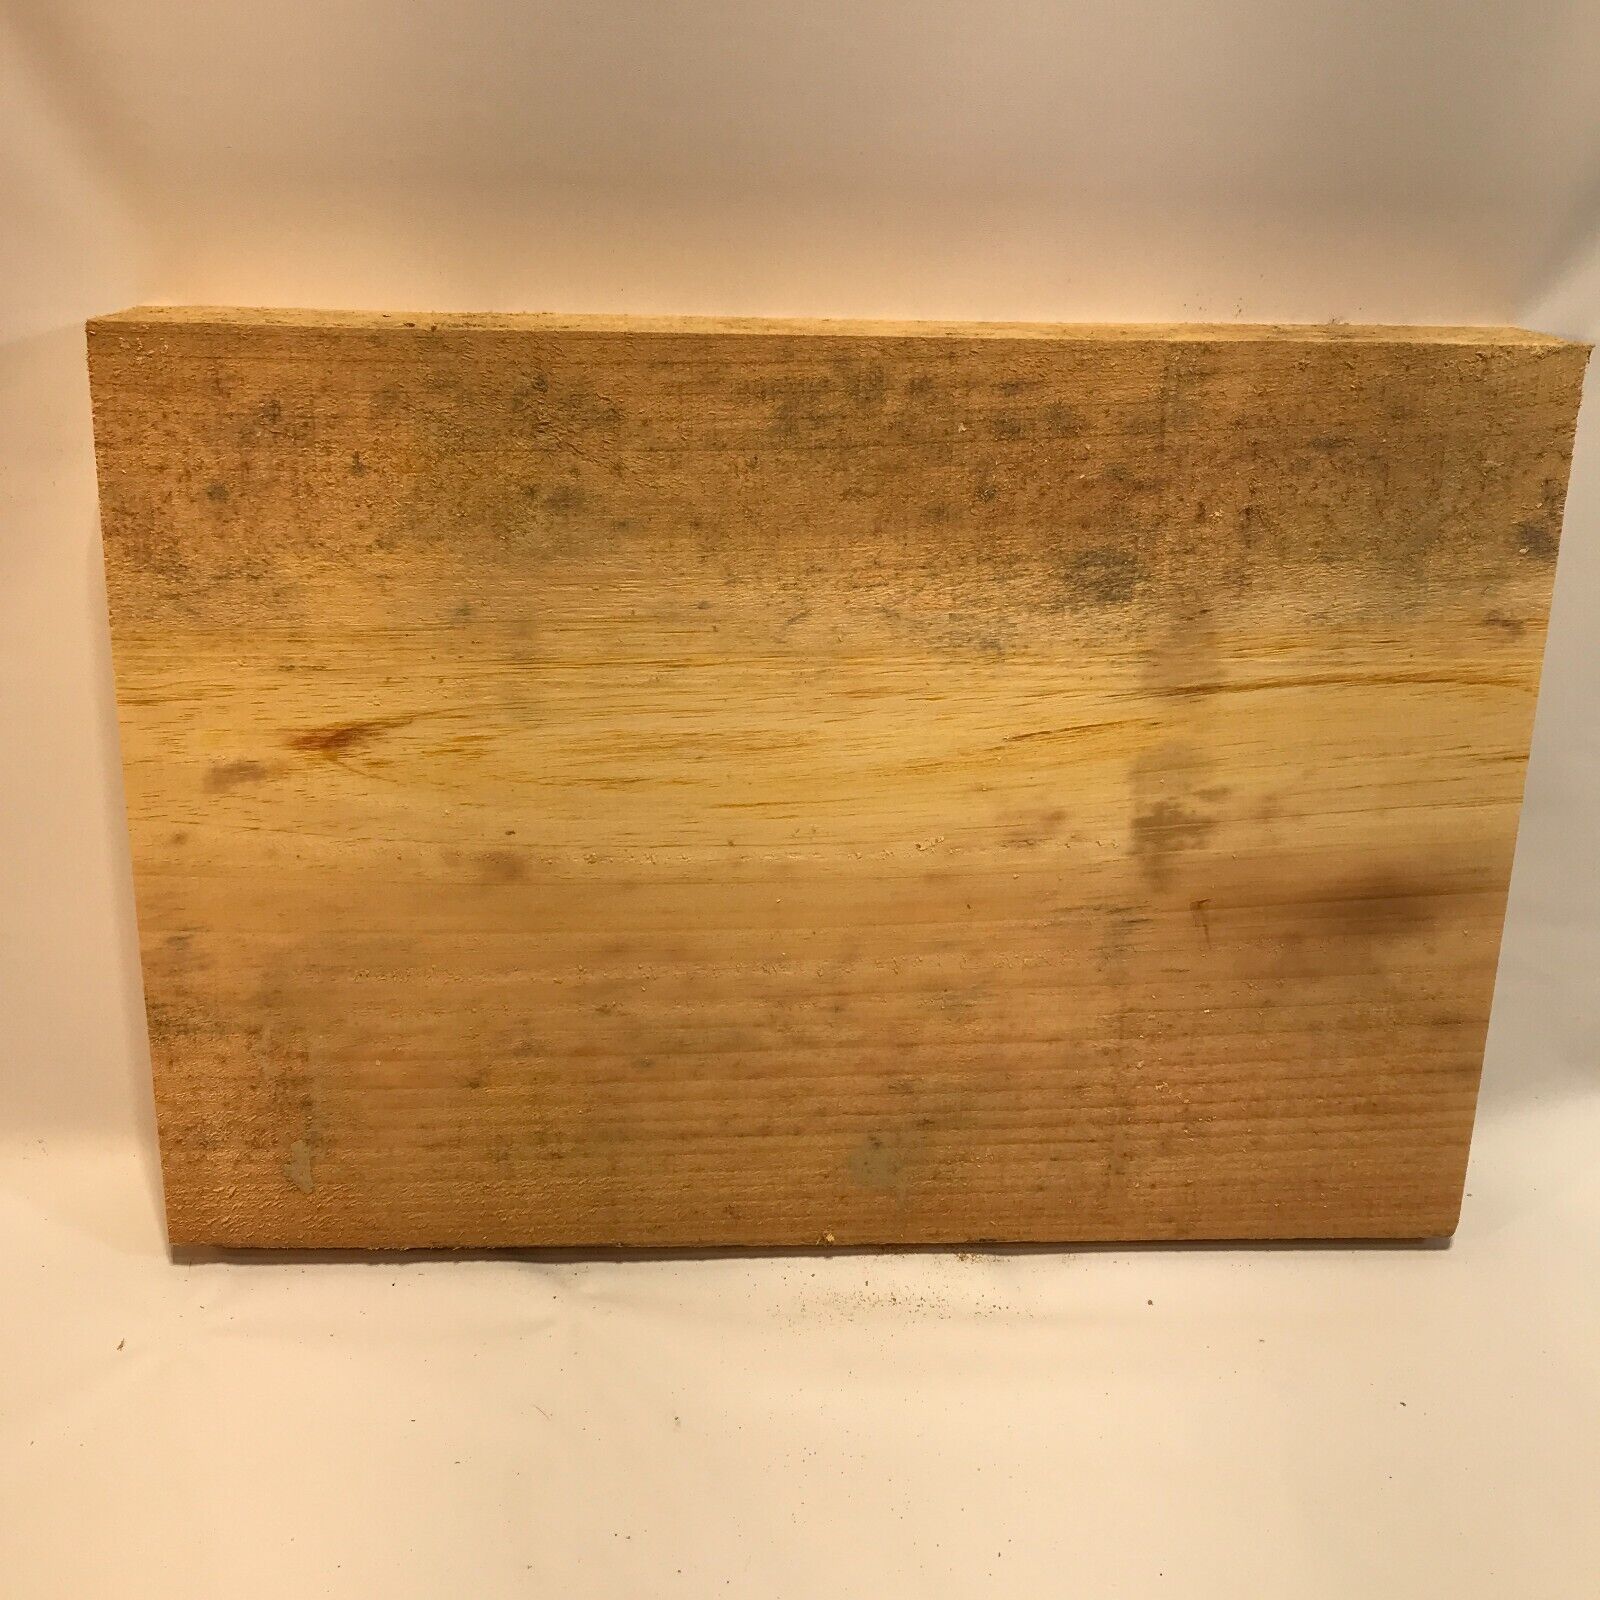 White Pine Wood For Carving And Crafts 2" Thick